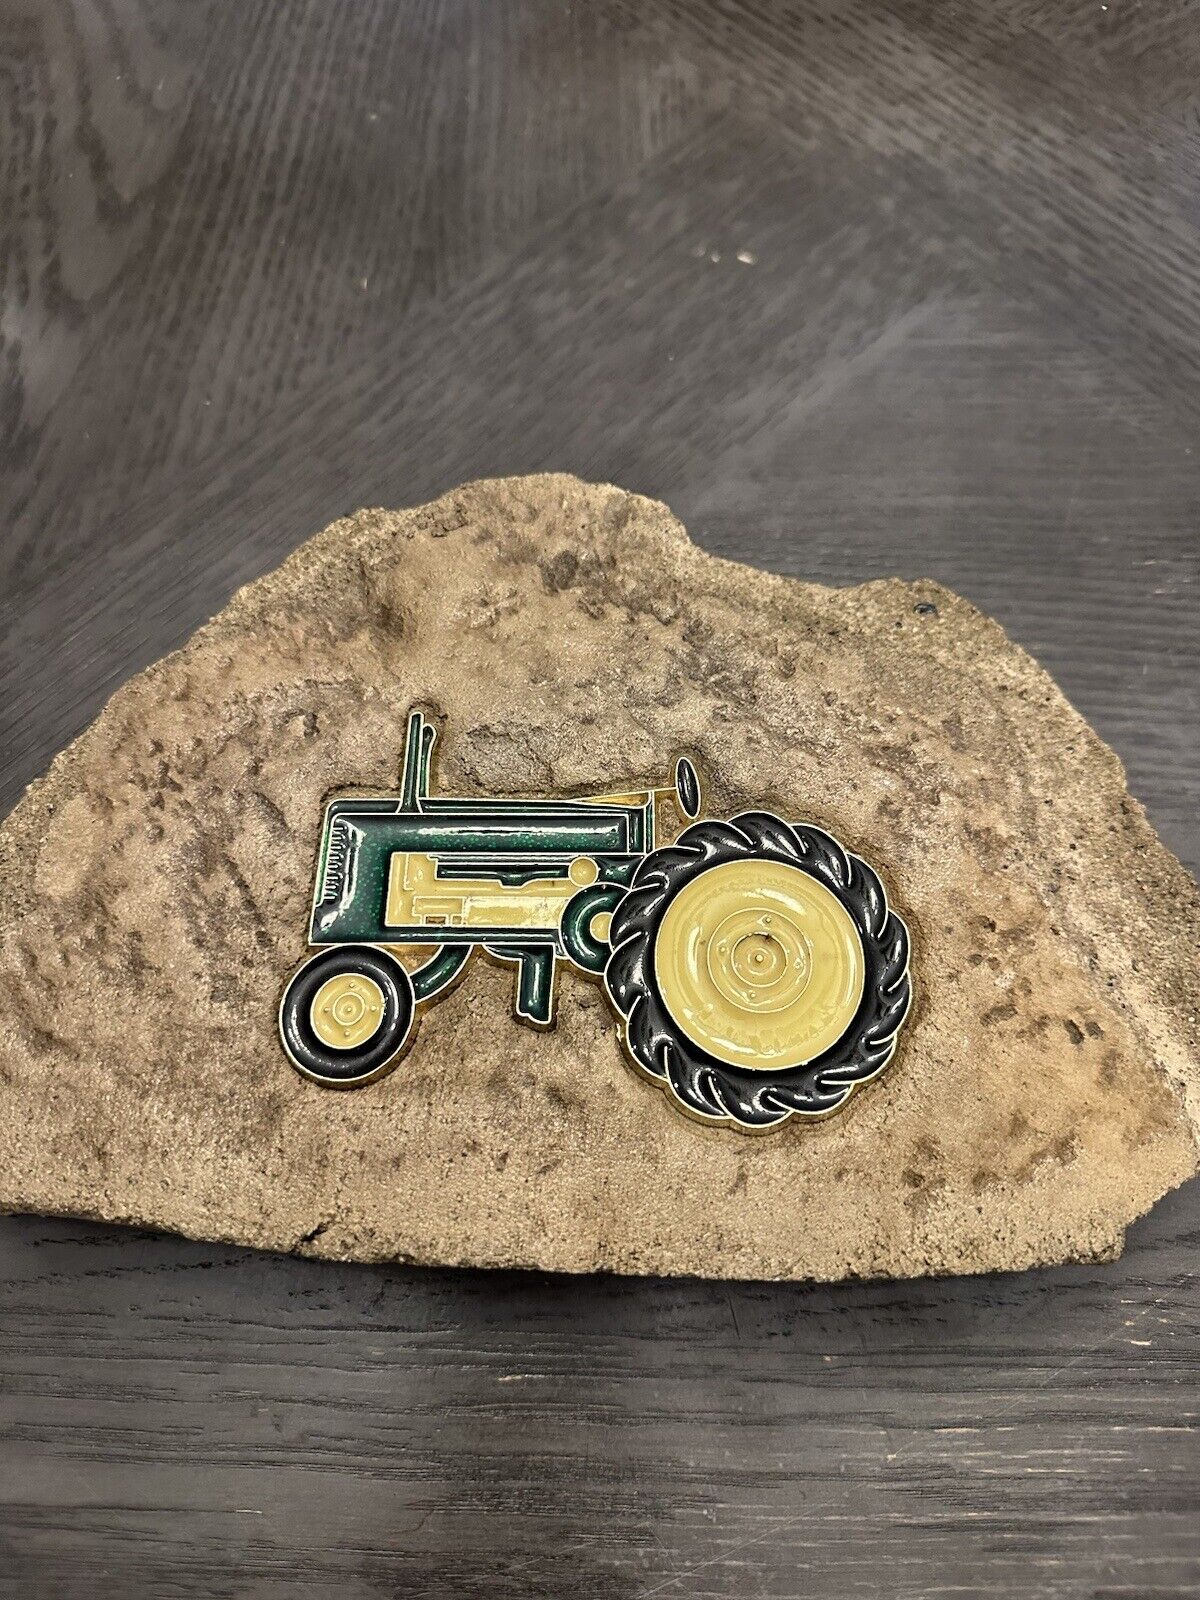 Stone Decor With Inlaid John Deere Tractor. Real Stone Almost 6 Lbs. 10x7